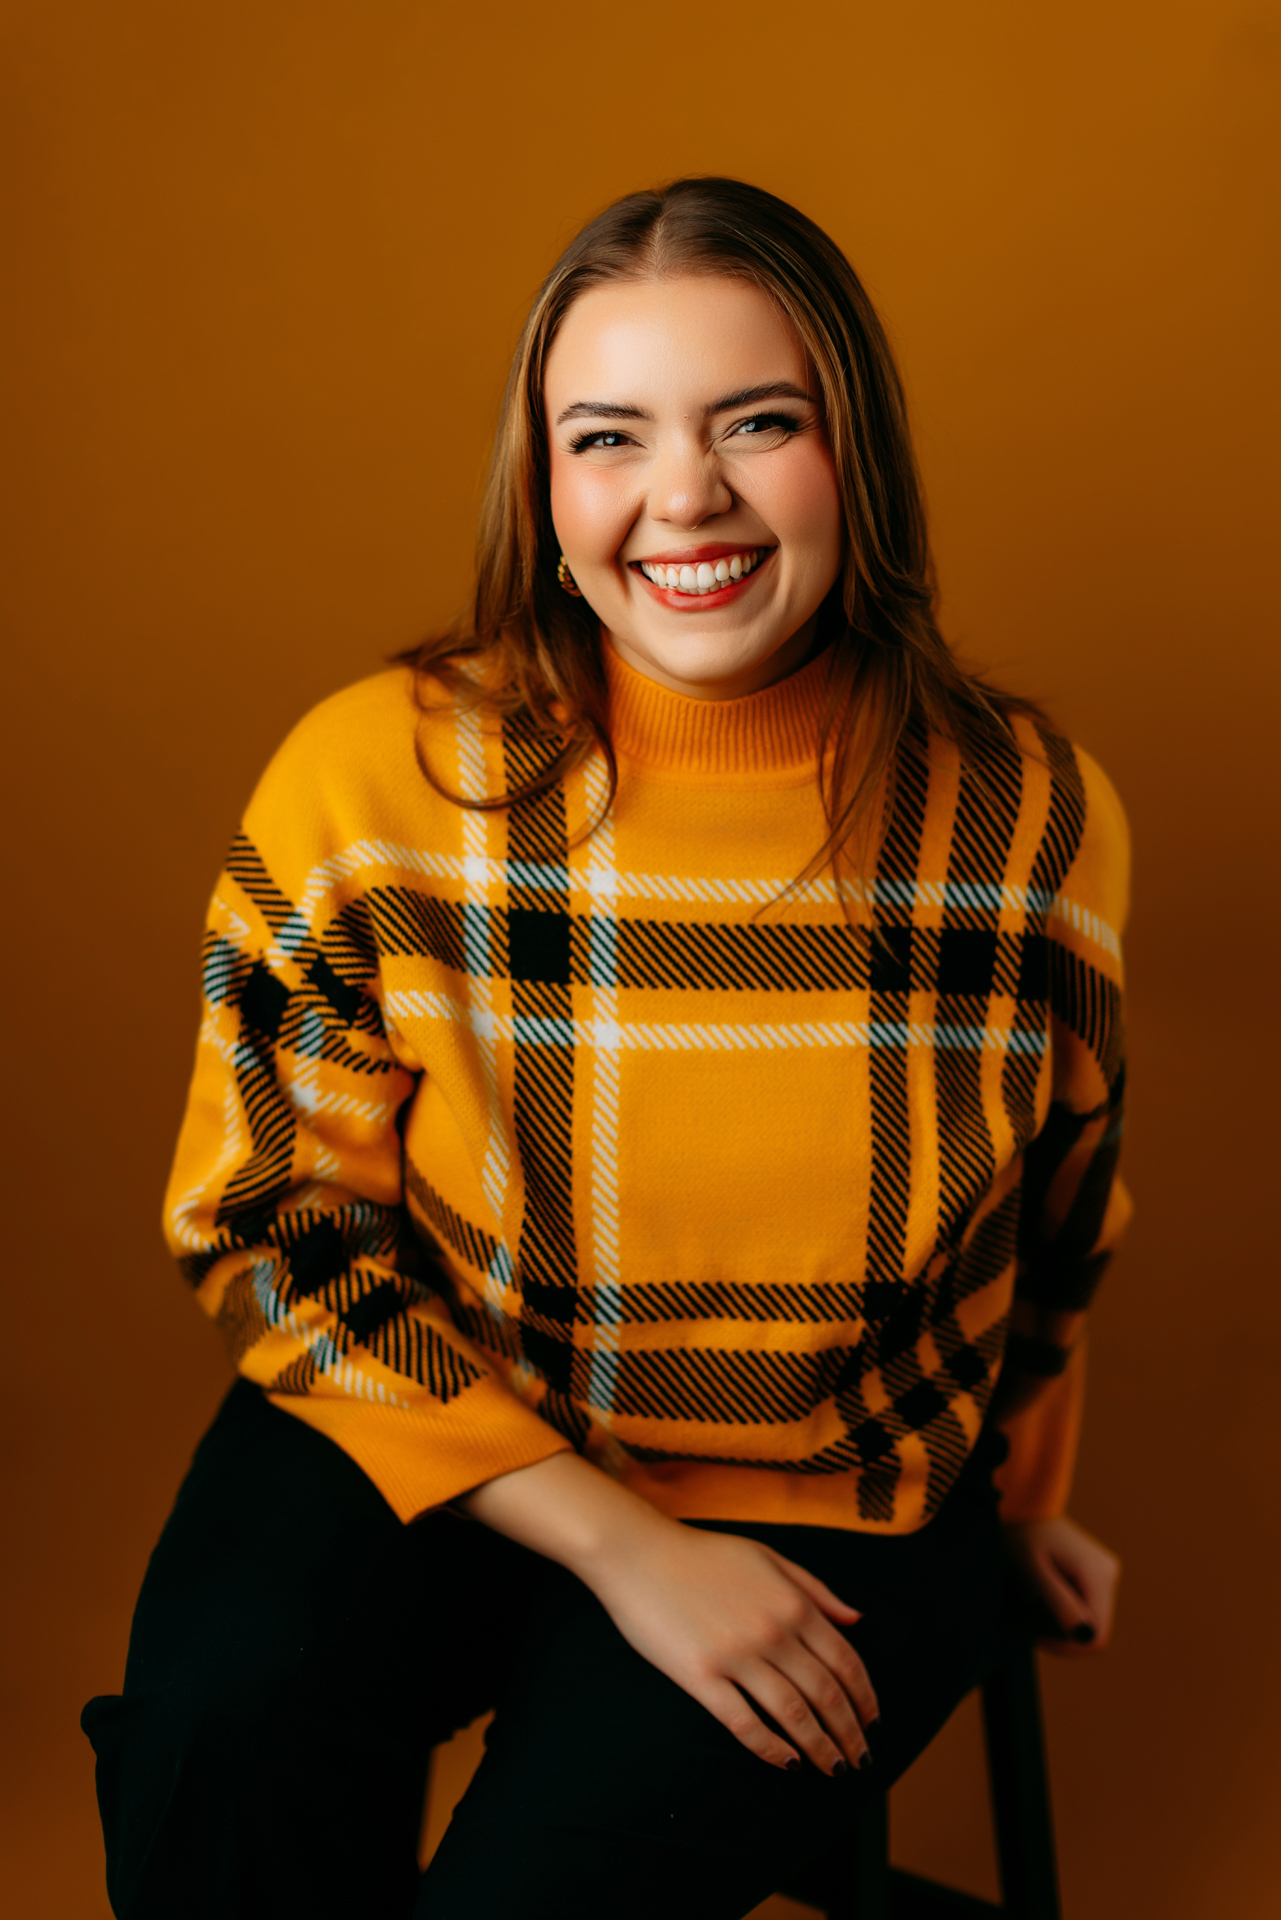 Professional headshot of smiling young woman in black and yellow sweatshirt and deep yellow background